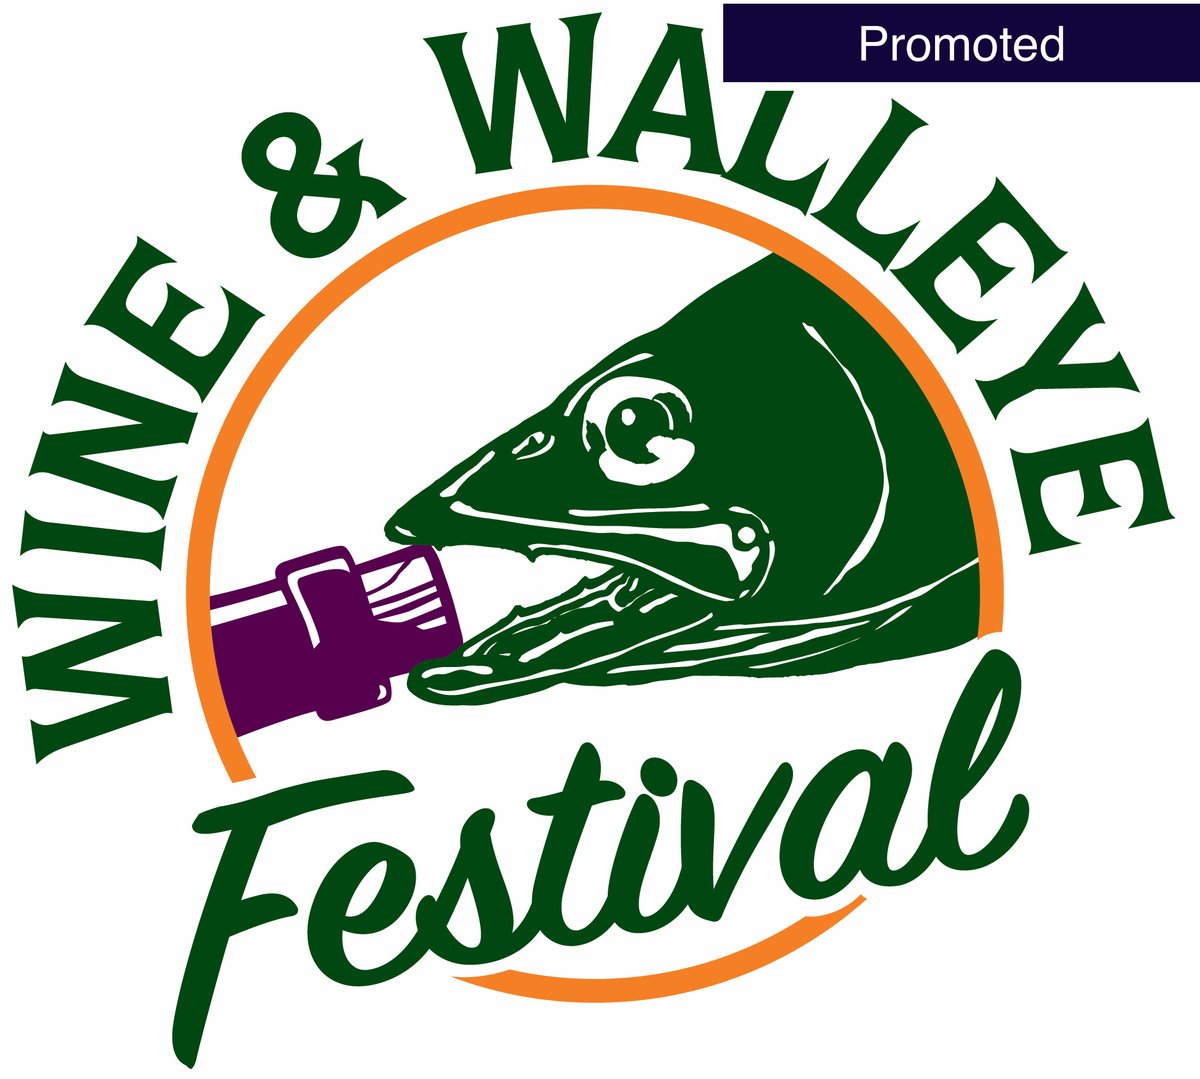 A favorite summer attraction is the Wine & Walleye Festival held in the heart of the harbor. Featuring 3 days of music, street vendors, boat parade, fishing contests, wine garden featuring the counties’ favorite wineries, and of course the delicious Lake Erie Perch and Walleye.